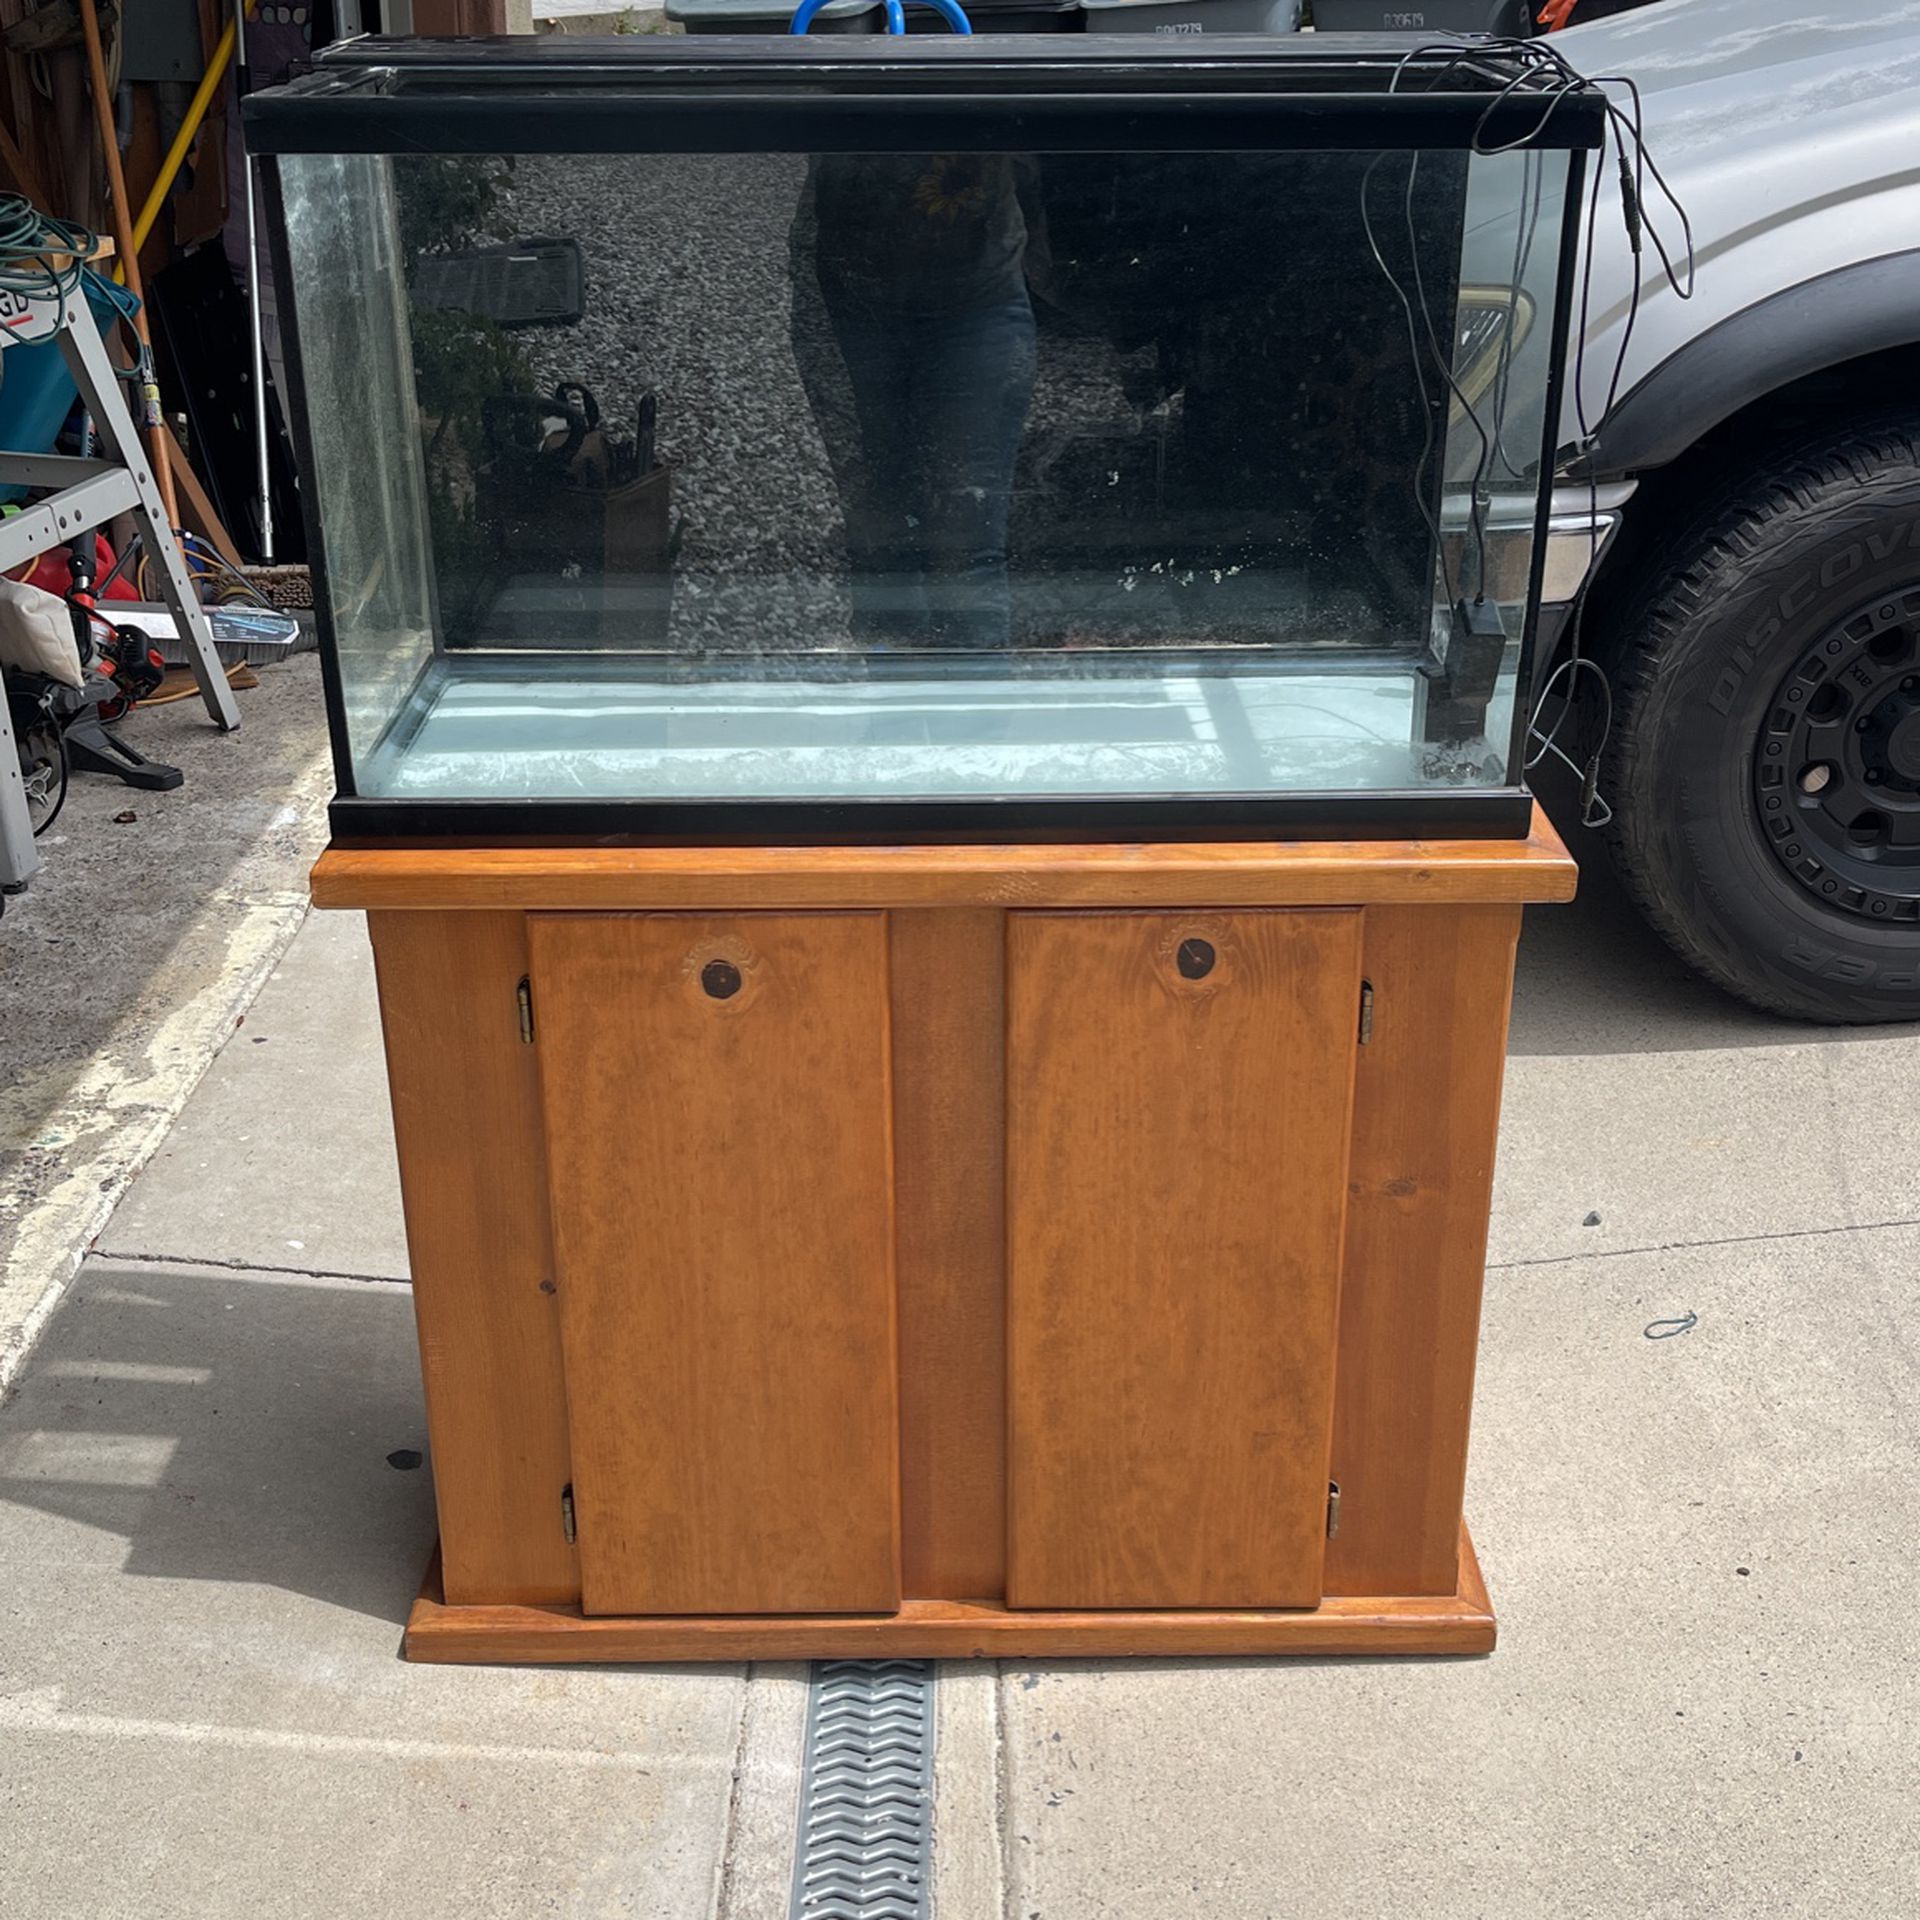 55-60 Gallon Fish Tank With Stand And Lights